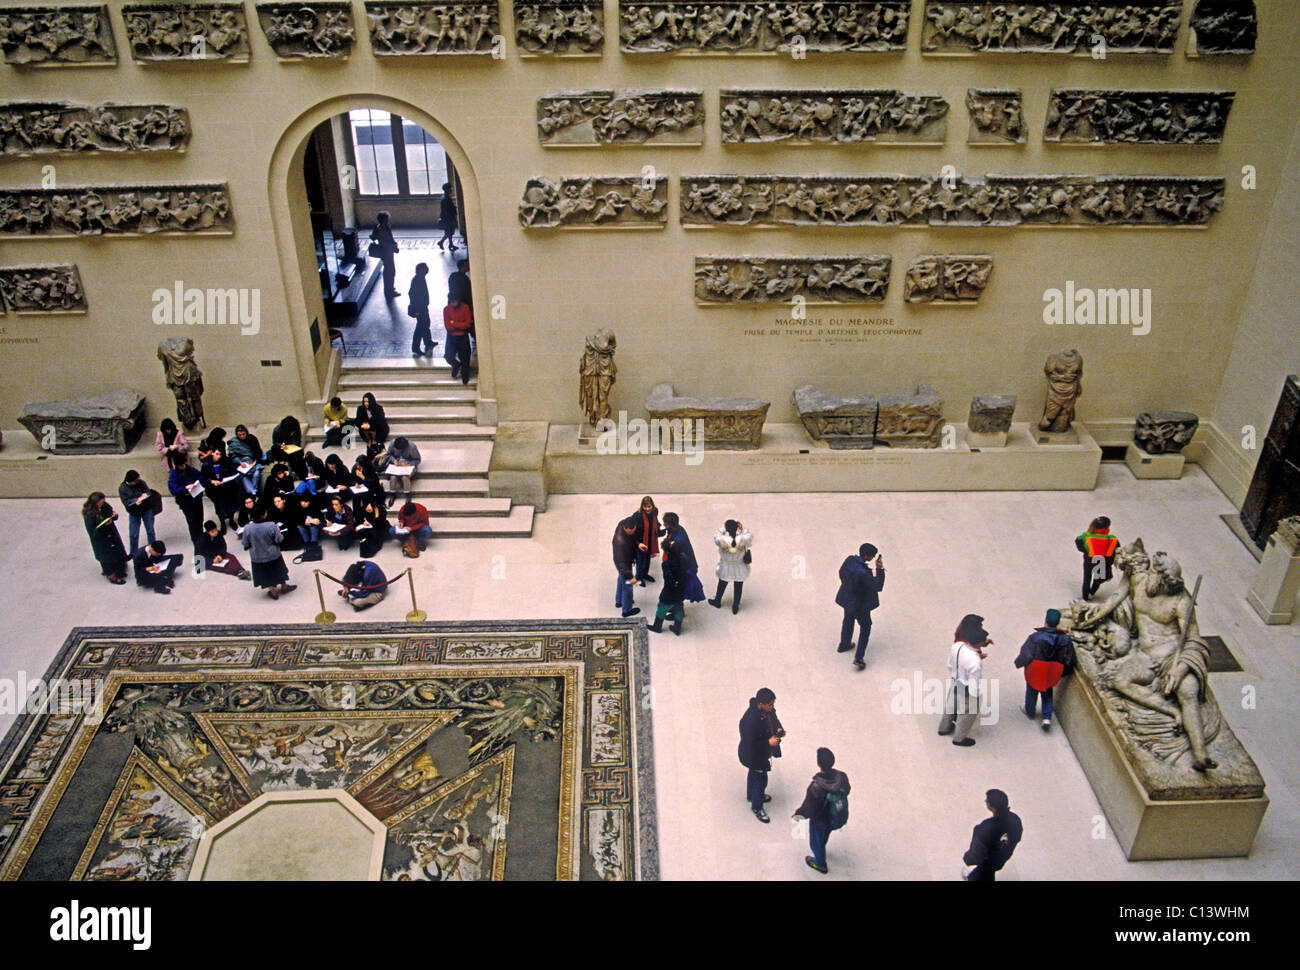 people, students on student field trip, Greek antiquities at Denon Gallery, Louvre Museum, art museum, French museum, Paris, Ile-de-France, France Stock Photo